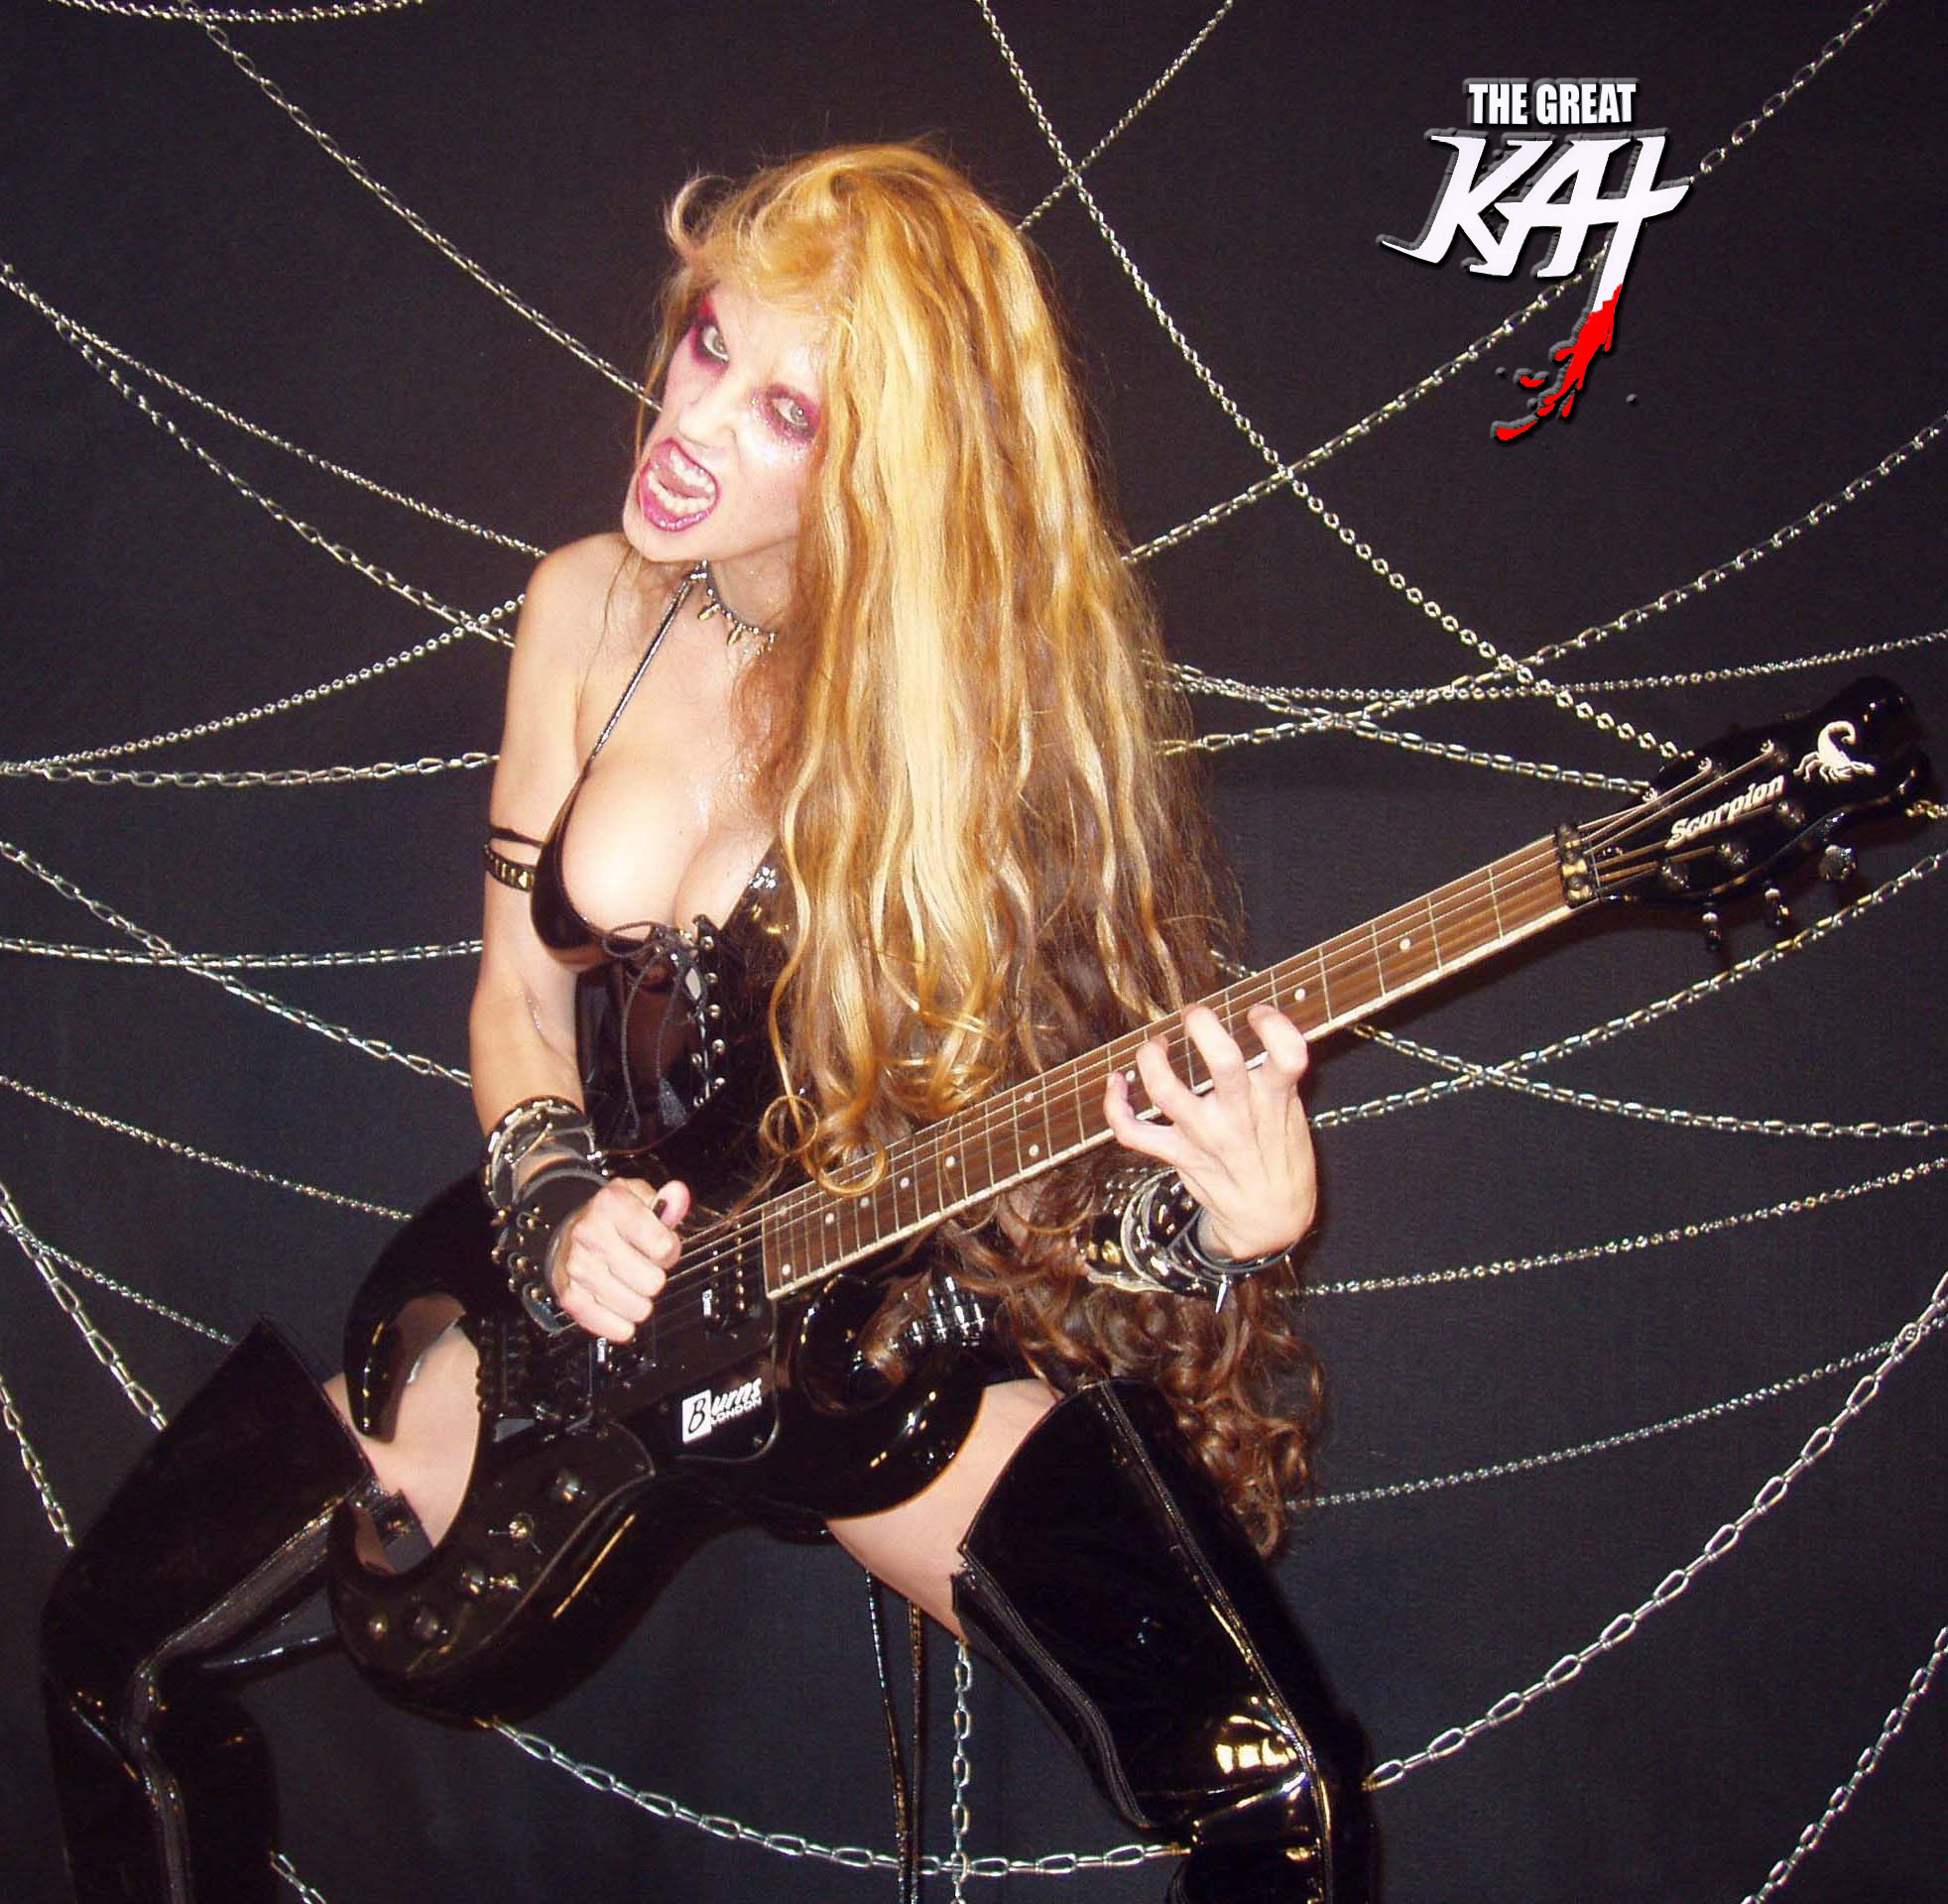 "The Great Kat: Guitar Strings on a Cat o'Nine Tails. The Great Kat: More than 9 lives of musical virtuosity" on SciFiMusi.com By Sergio Pescador